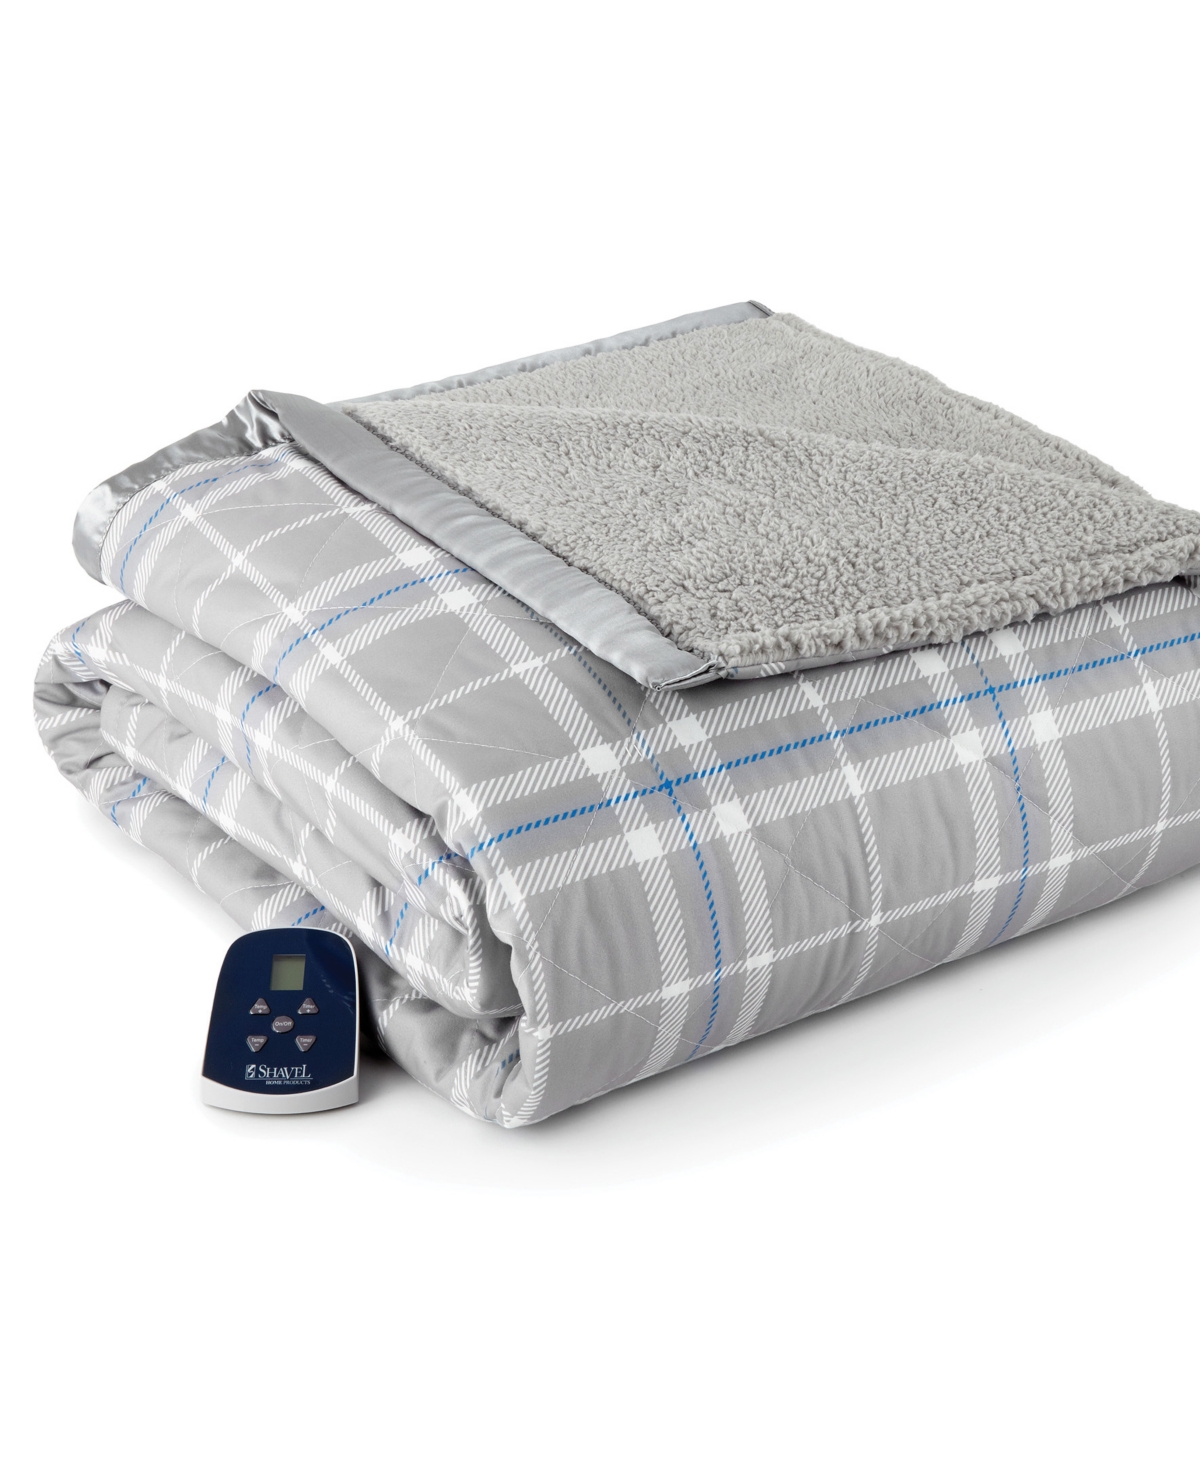 Shavel Reversible Micro Flannel To Sherpa Full Electric Blanket In Carlton Plaid Gray